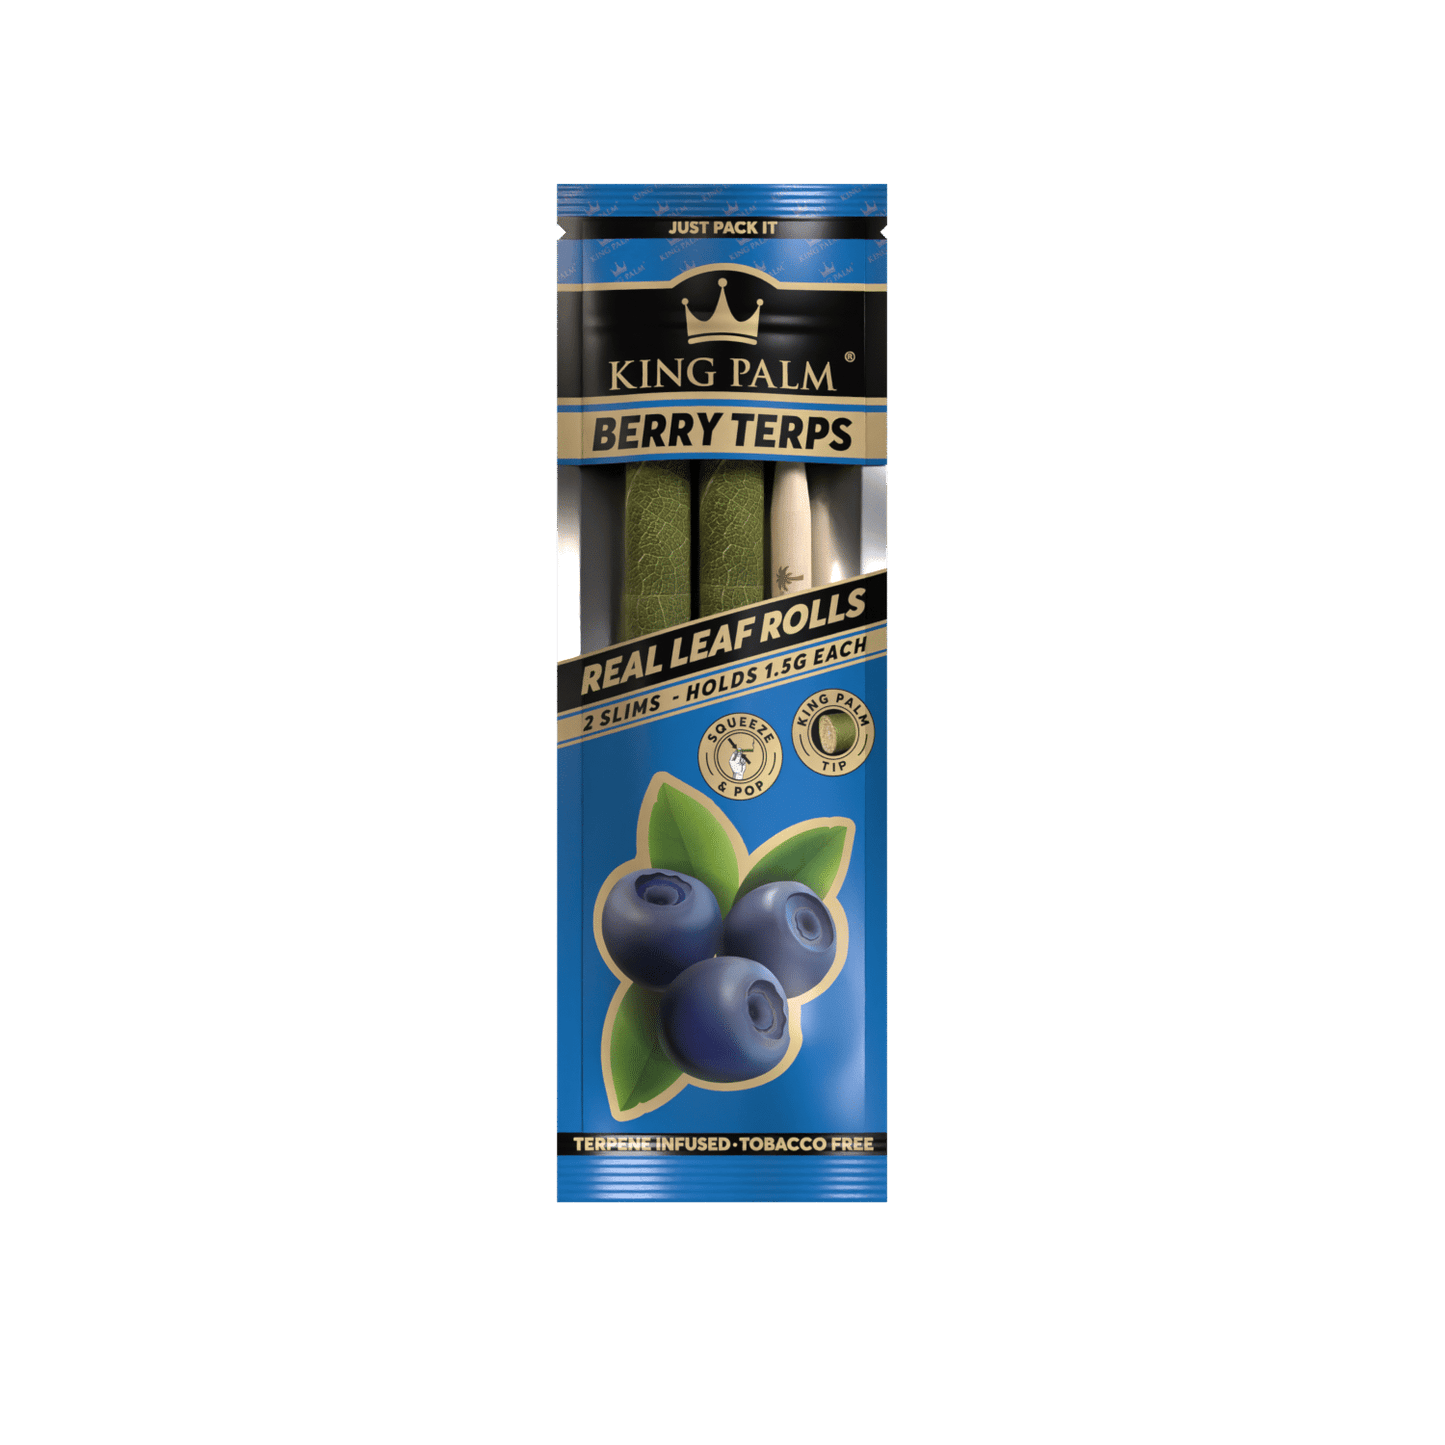 King Palm - Flavored Rolls, Slims (1.5g), Pack of 2